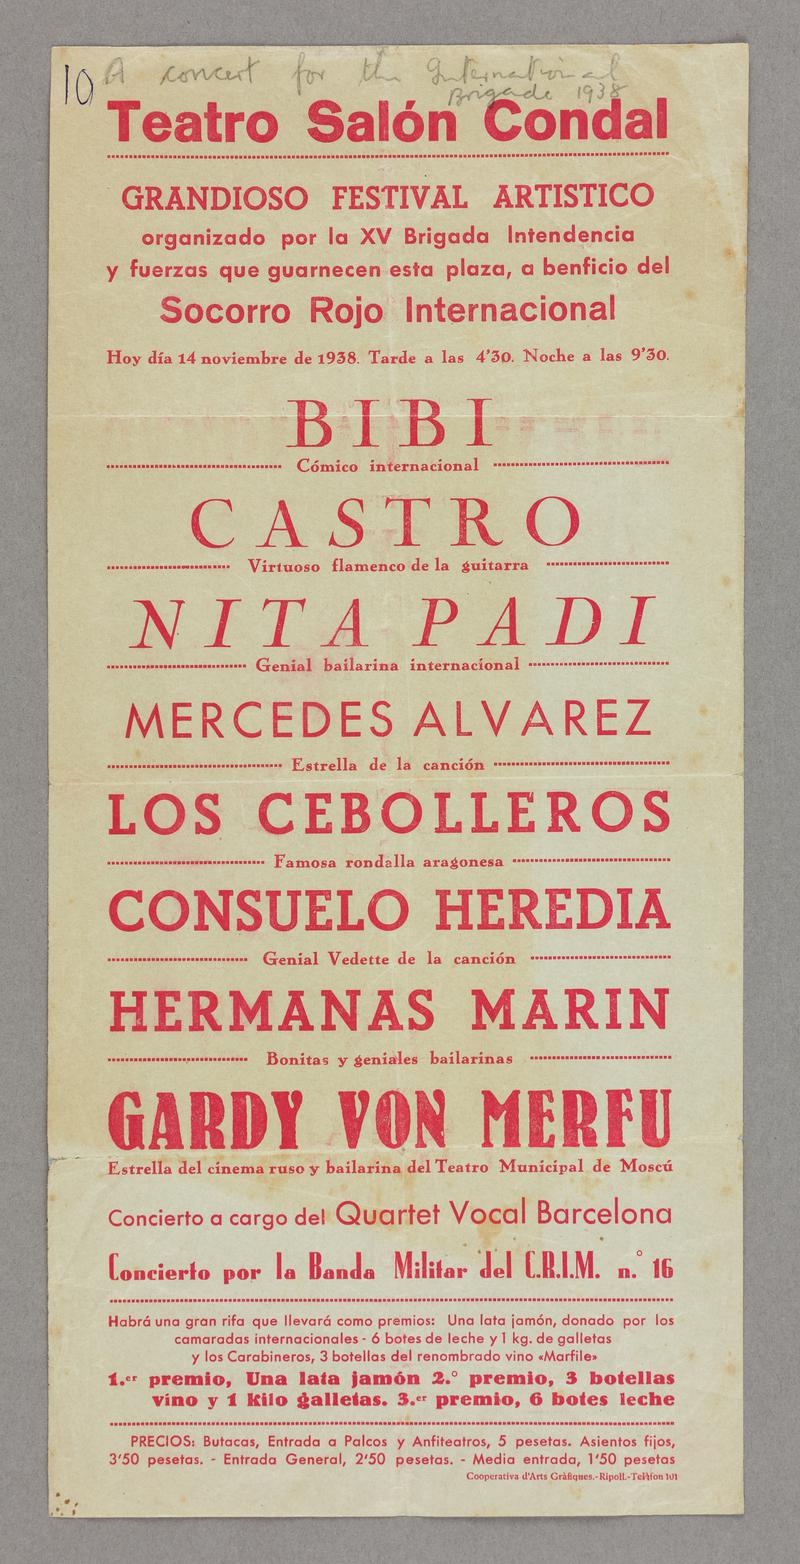 Handbill advertising concert for the International Brigades on 14 November 1938 at Teatro Salon Condal.  Red print on white paper.